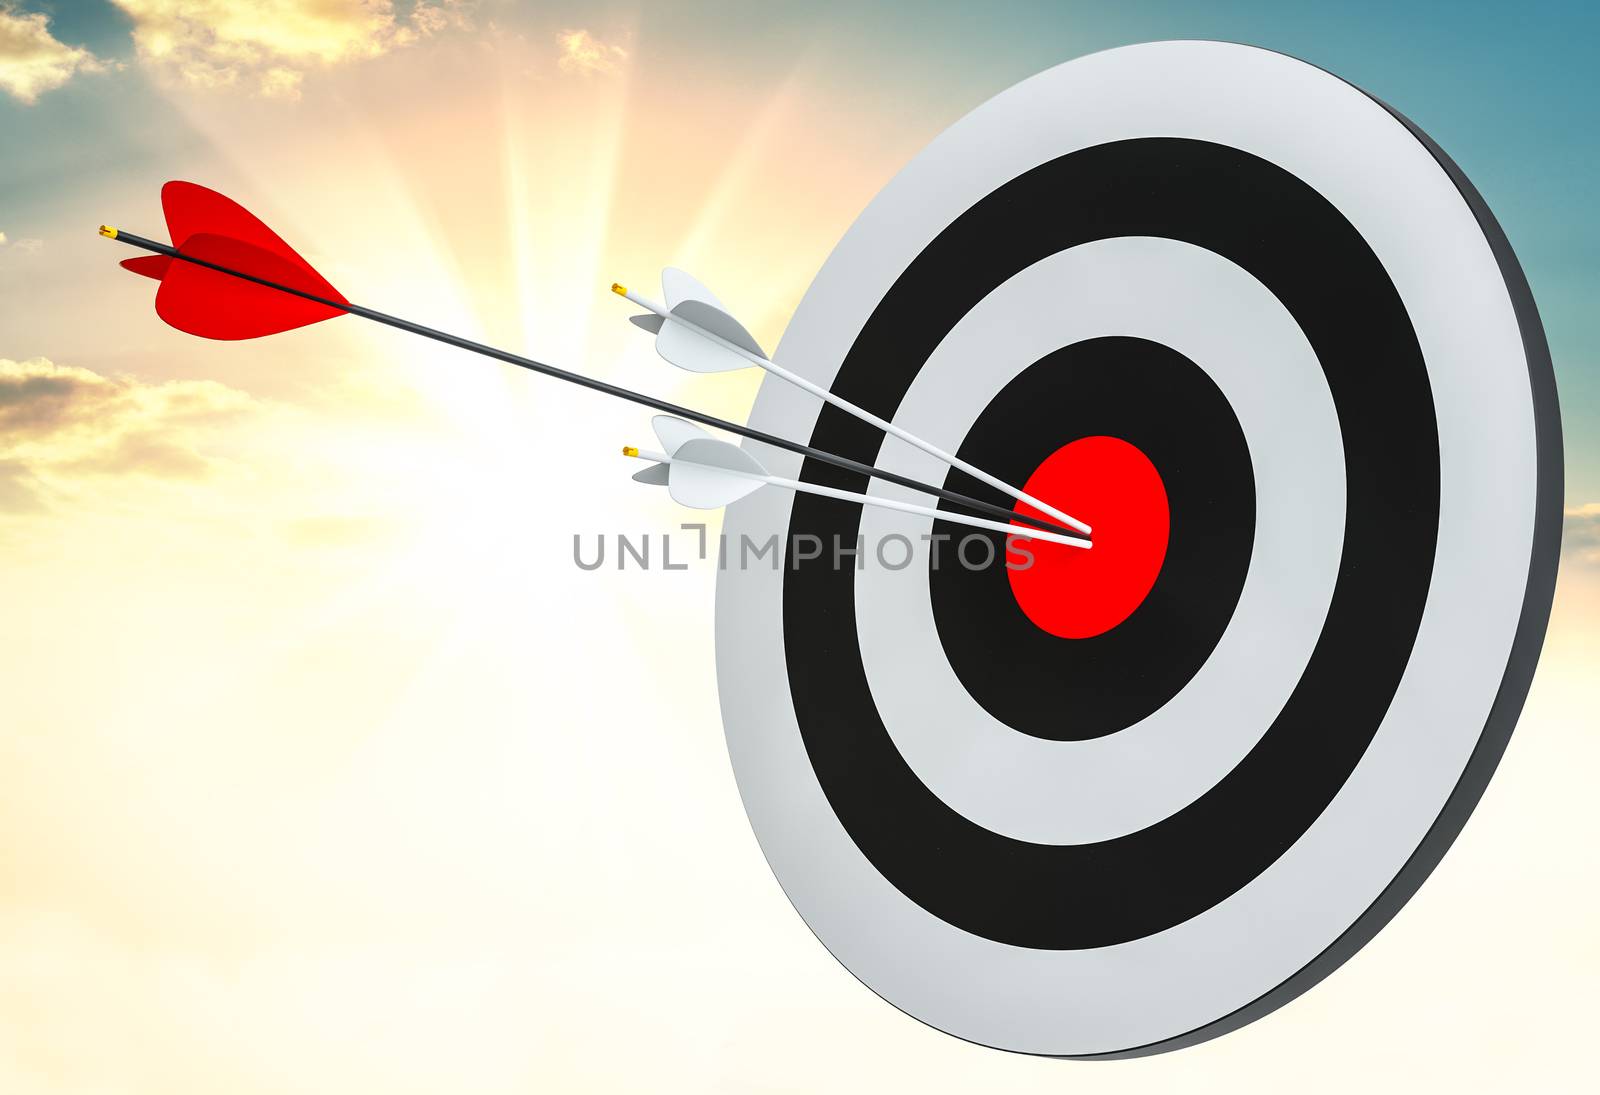 Target hit in center by arrows. 3d illustration. Sunrise on background